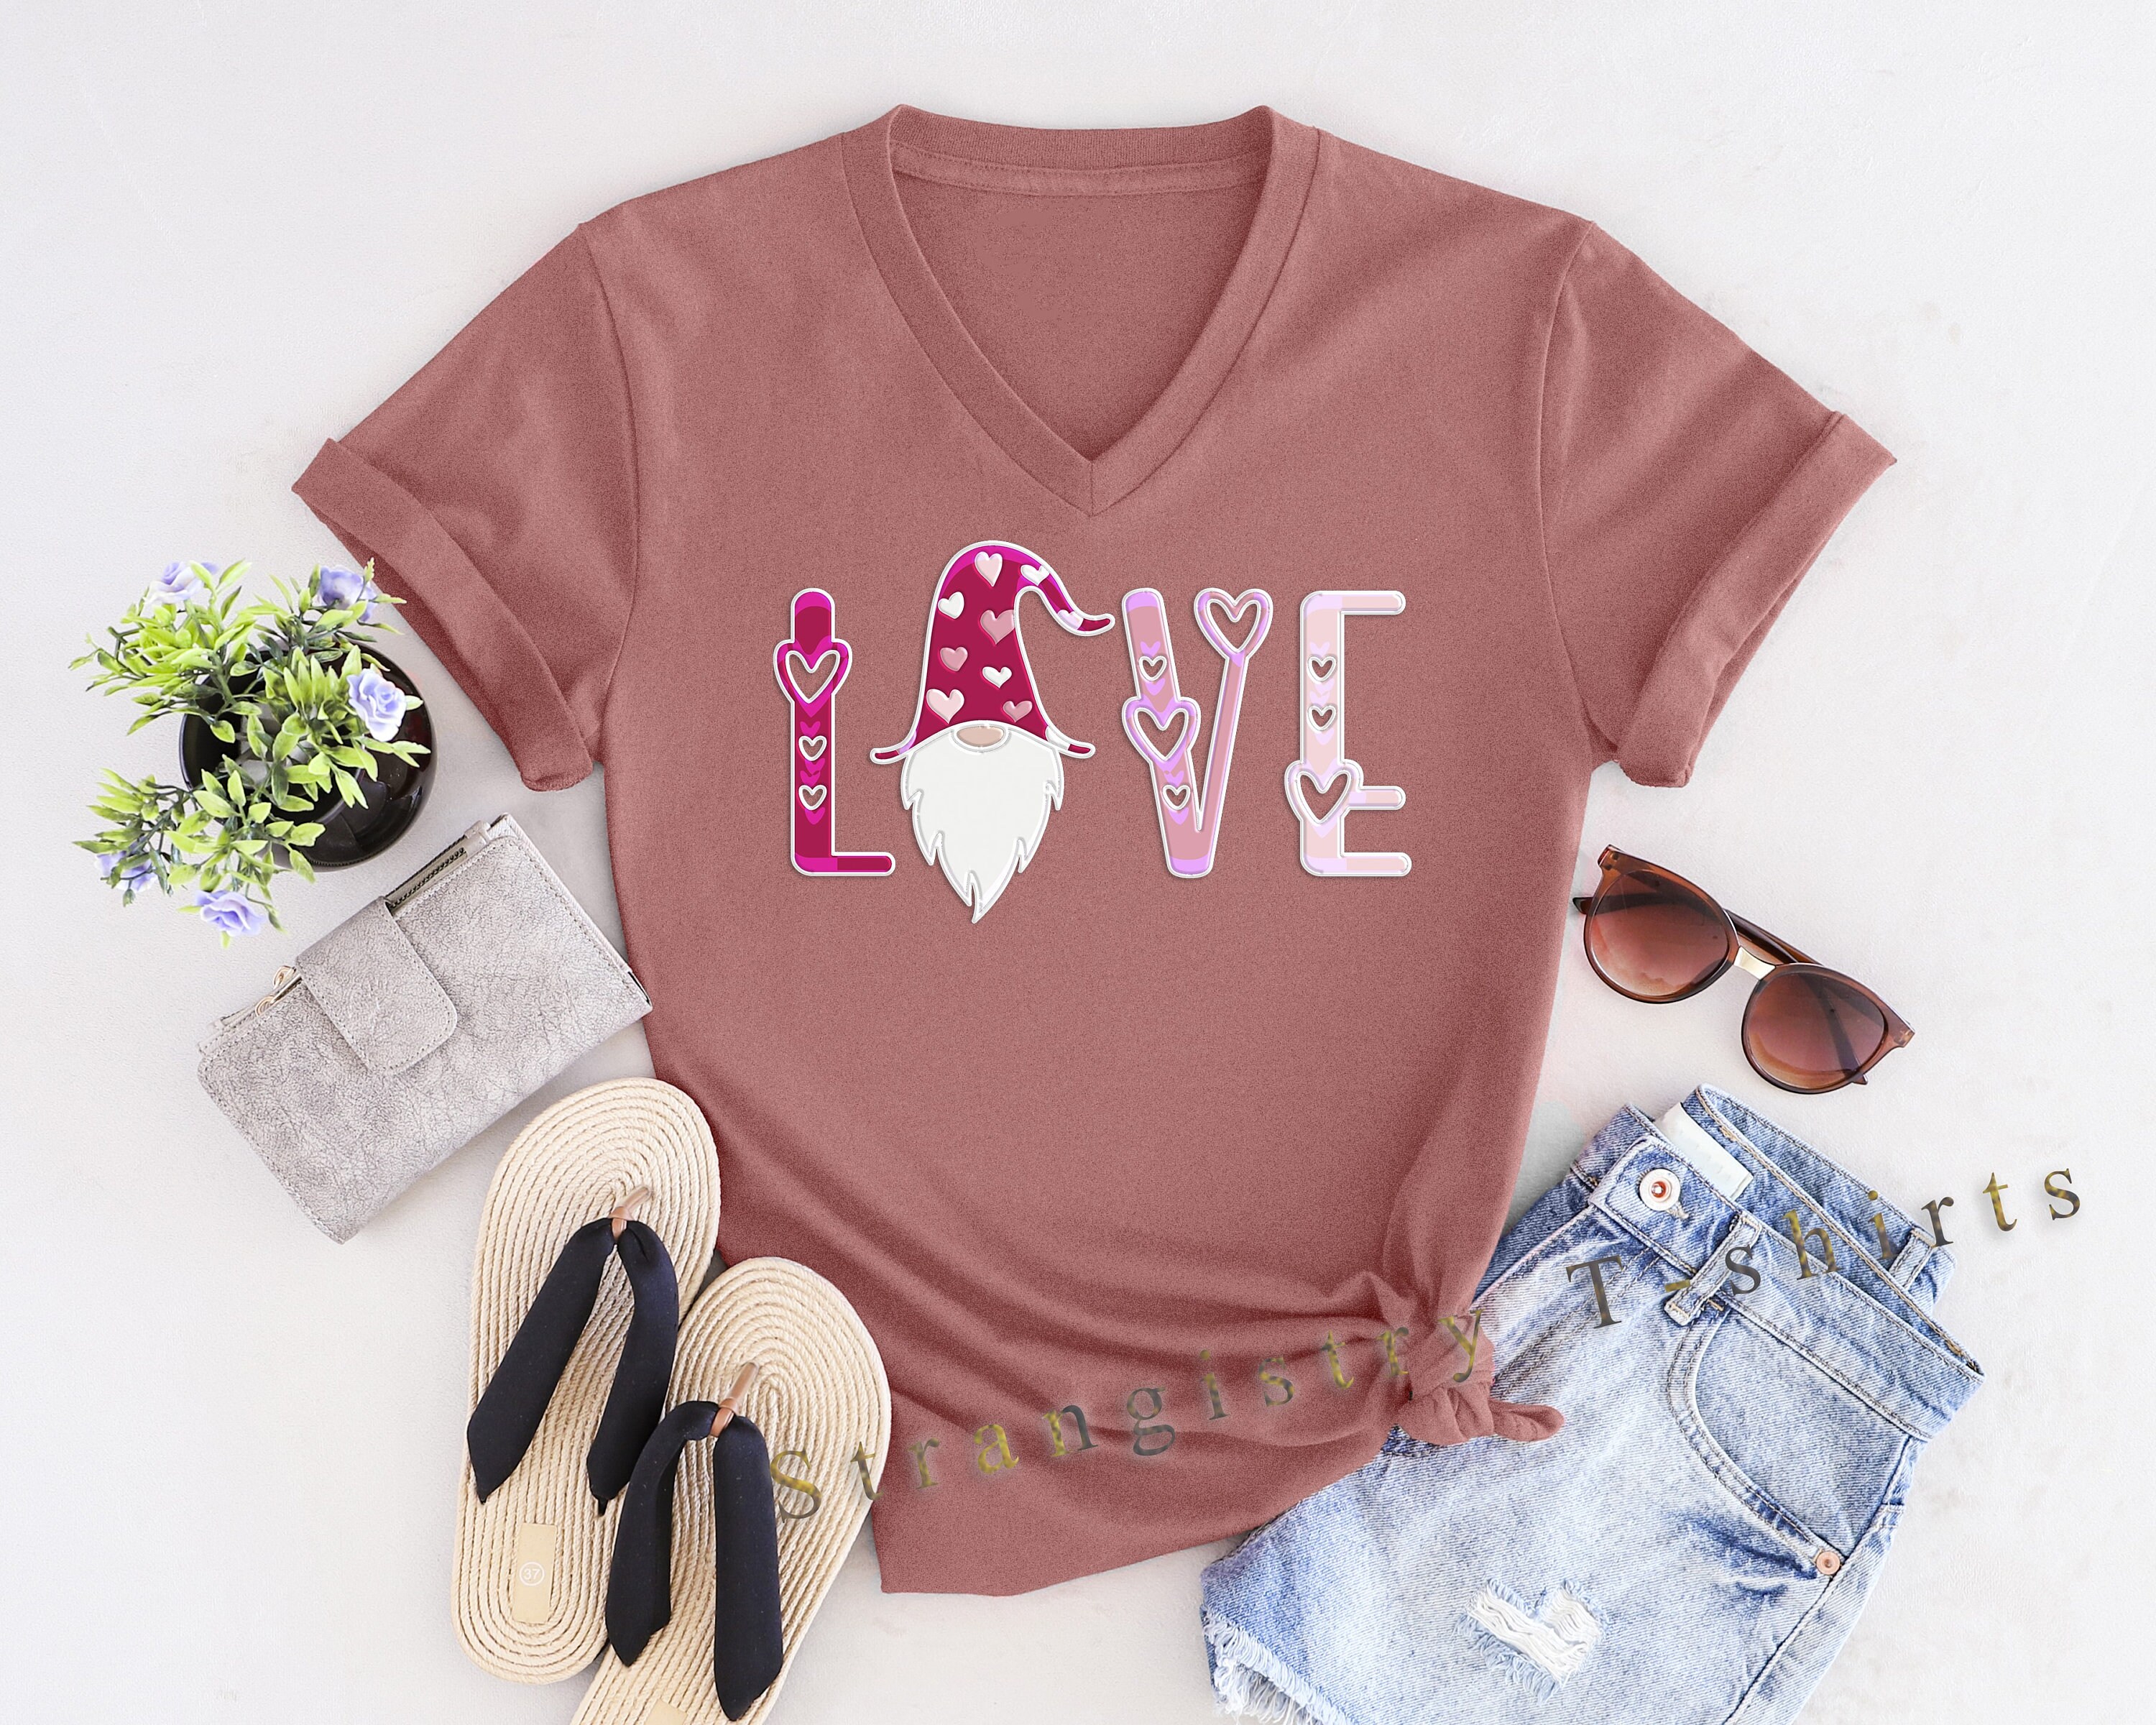 Love T-shirt with Gnome Design for Streetwear. Graphic Design Shirt with the Text of Love and Gnome. Cool Streetwear Tshirt for Crushes.